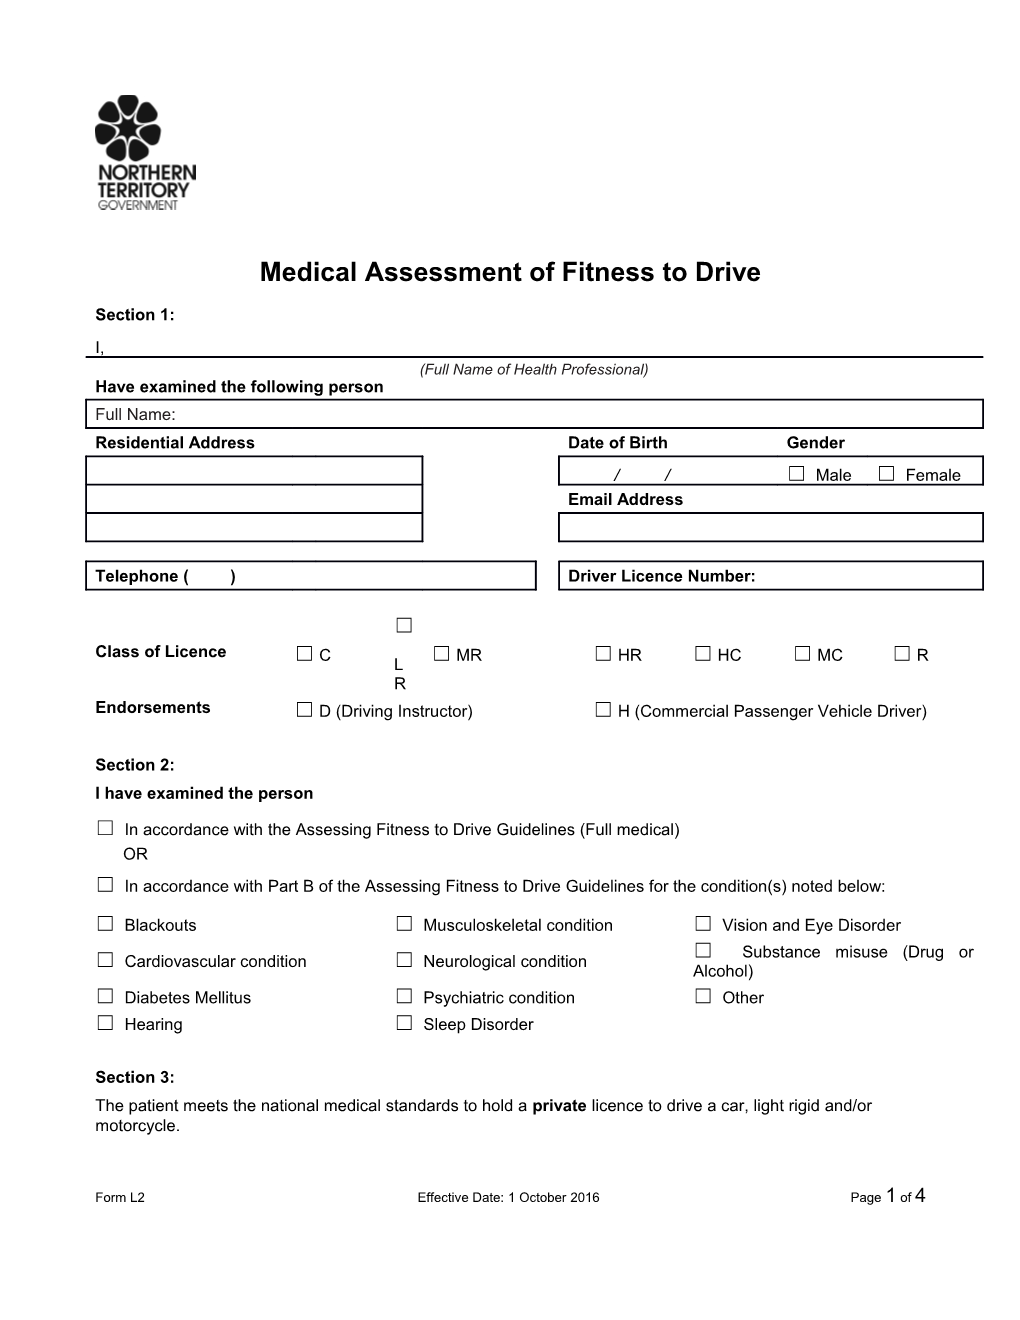 Medical Assessment of Fitness to Drive